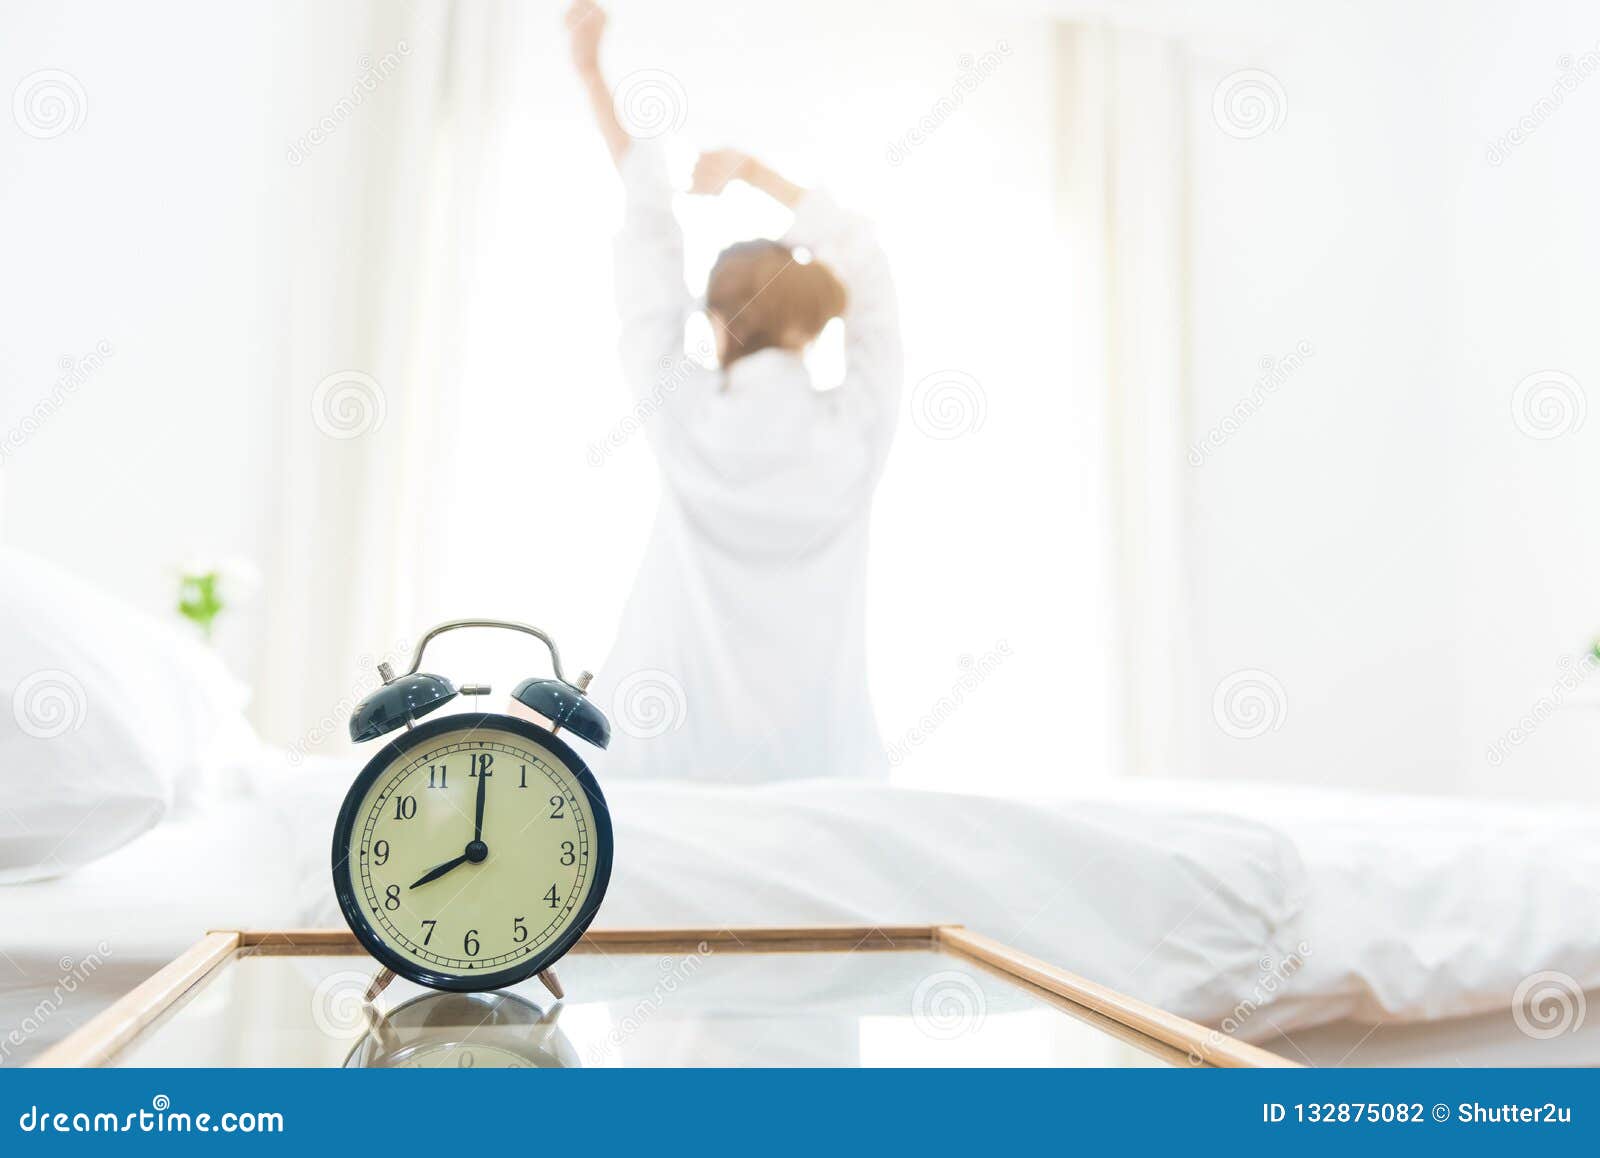 back view of woman stretching in morning after waking up on bed